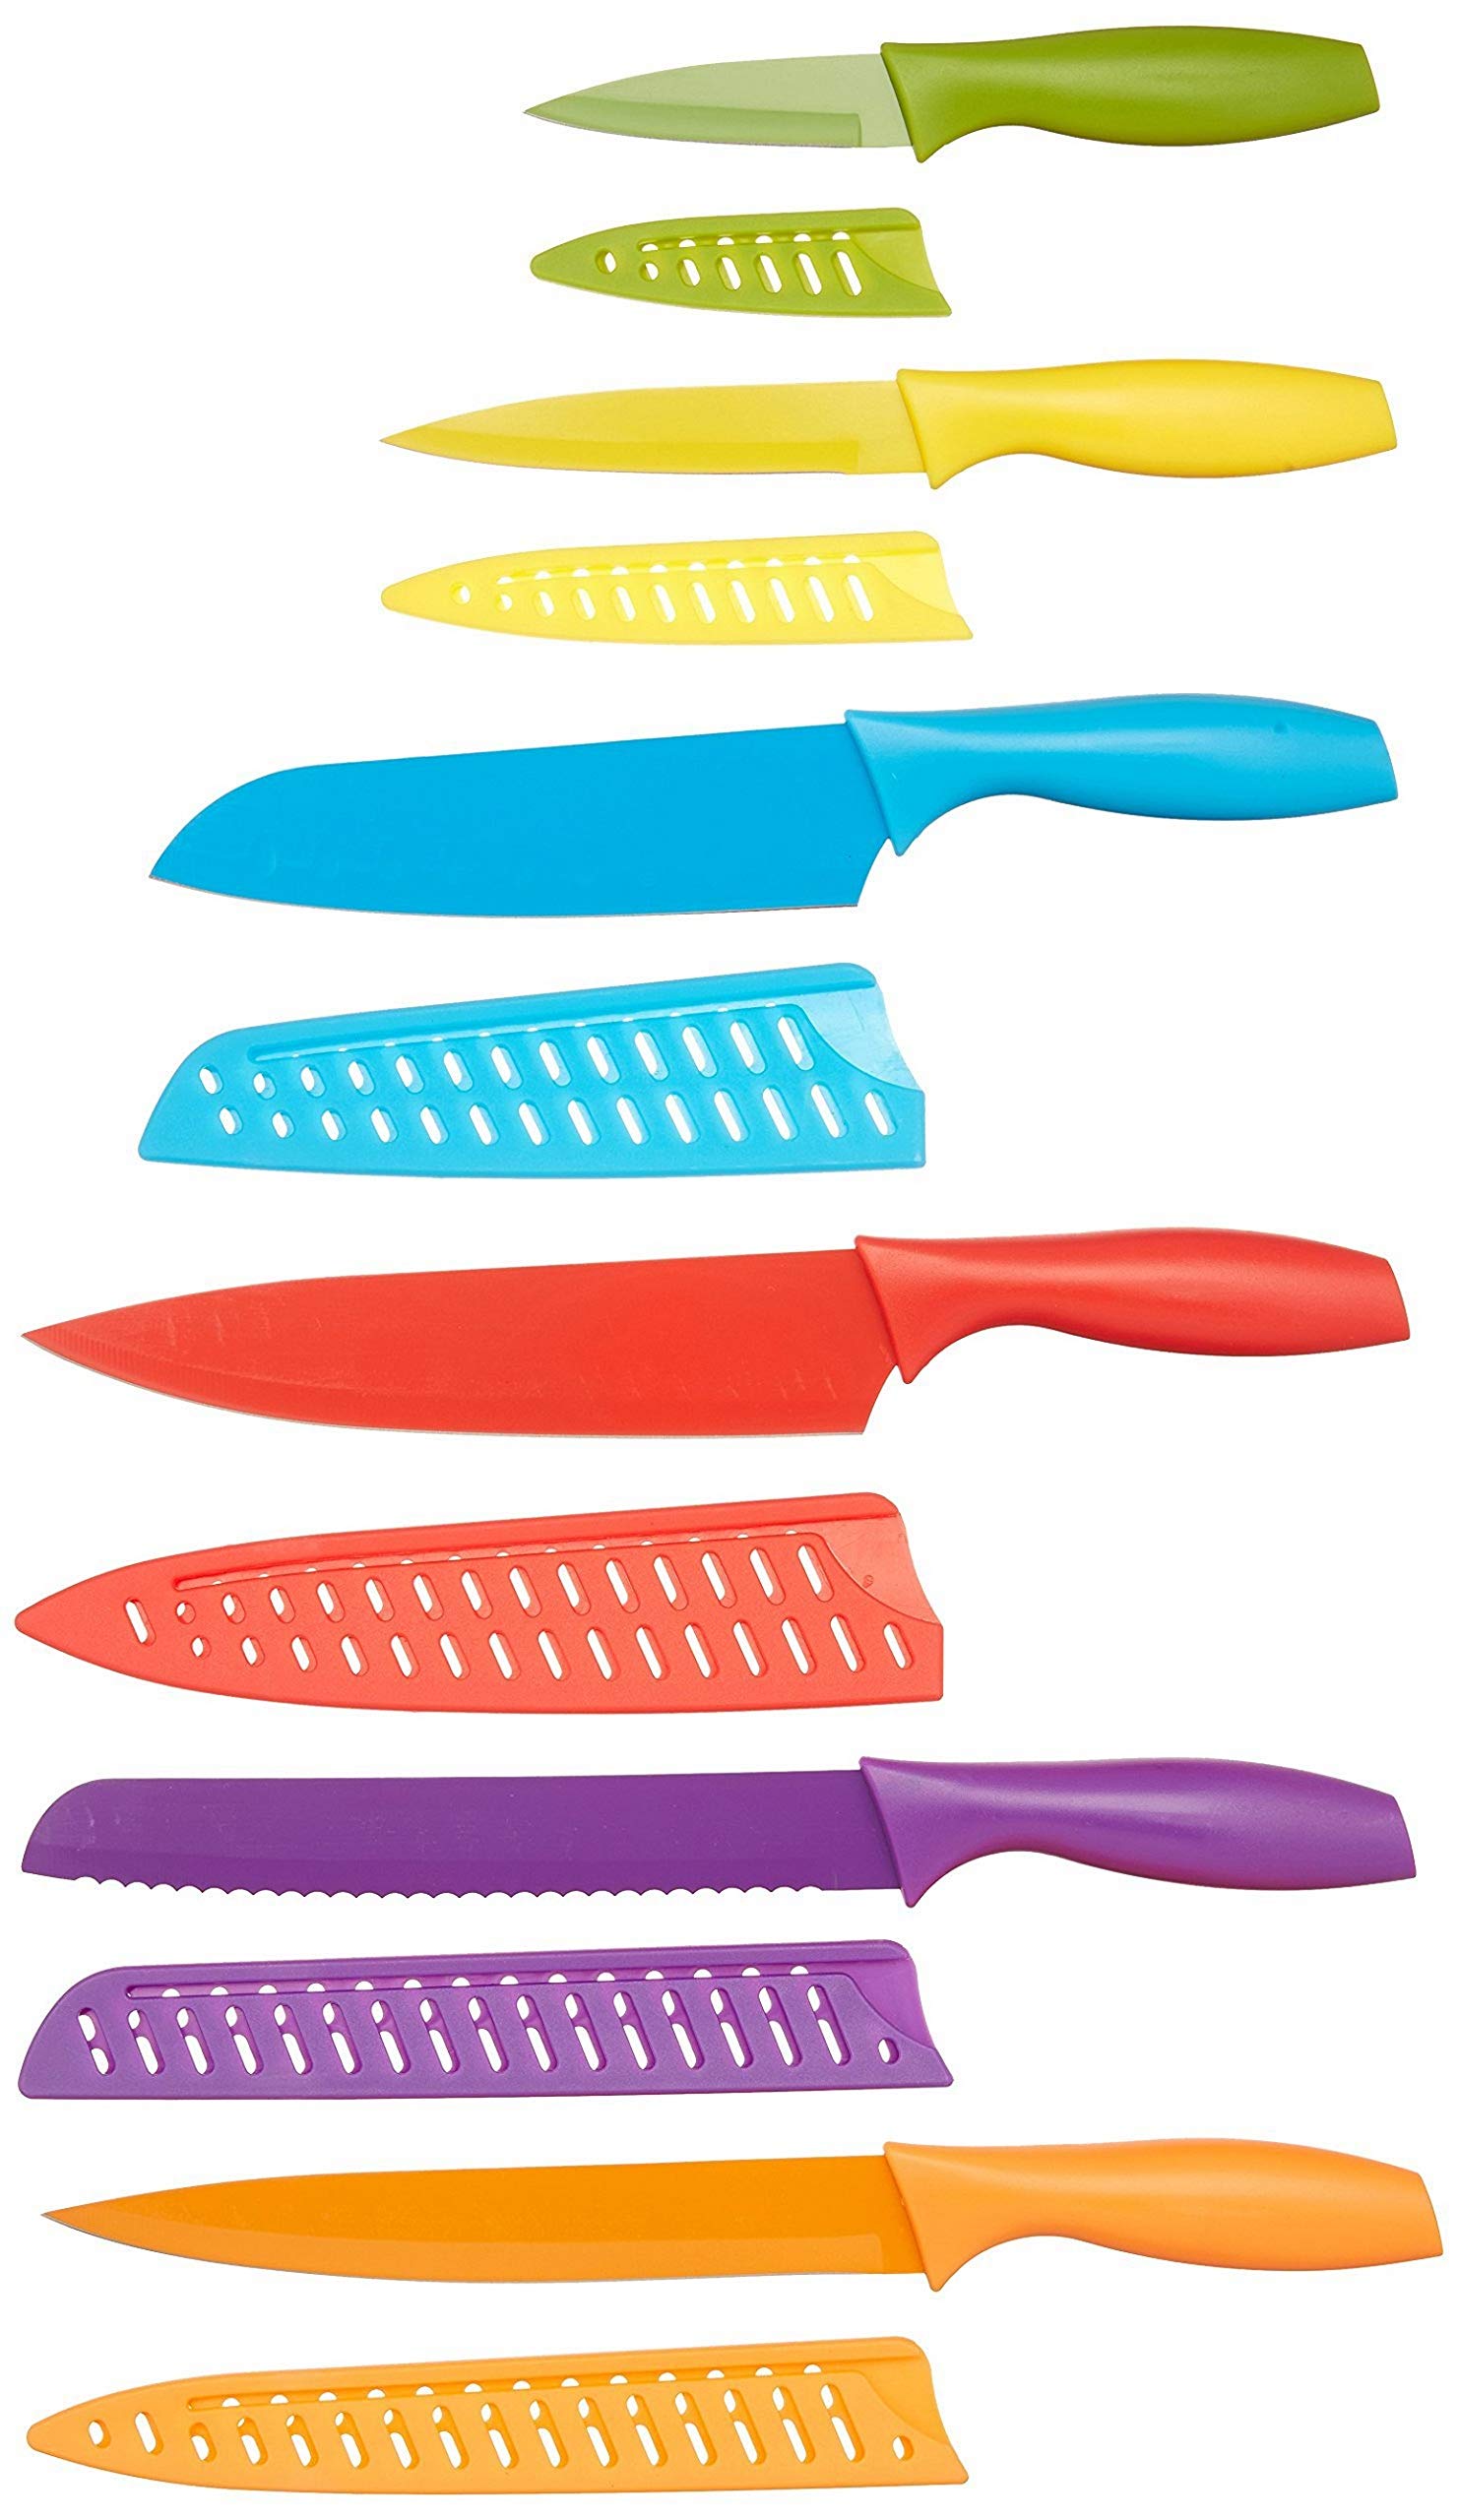 12-Piece Amazon Basics Color-Coded Kitchen Knife Set (6 Knives w/ 6 Blade Guards) $13.18 + Free Shipping w/ Prime or on orders over $25